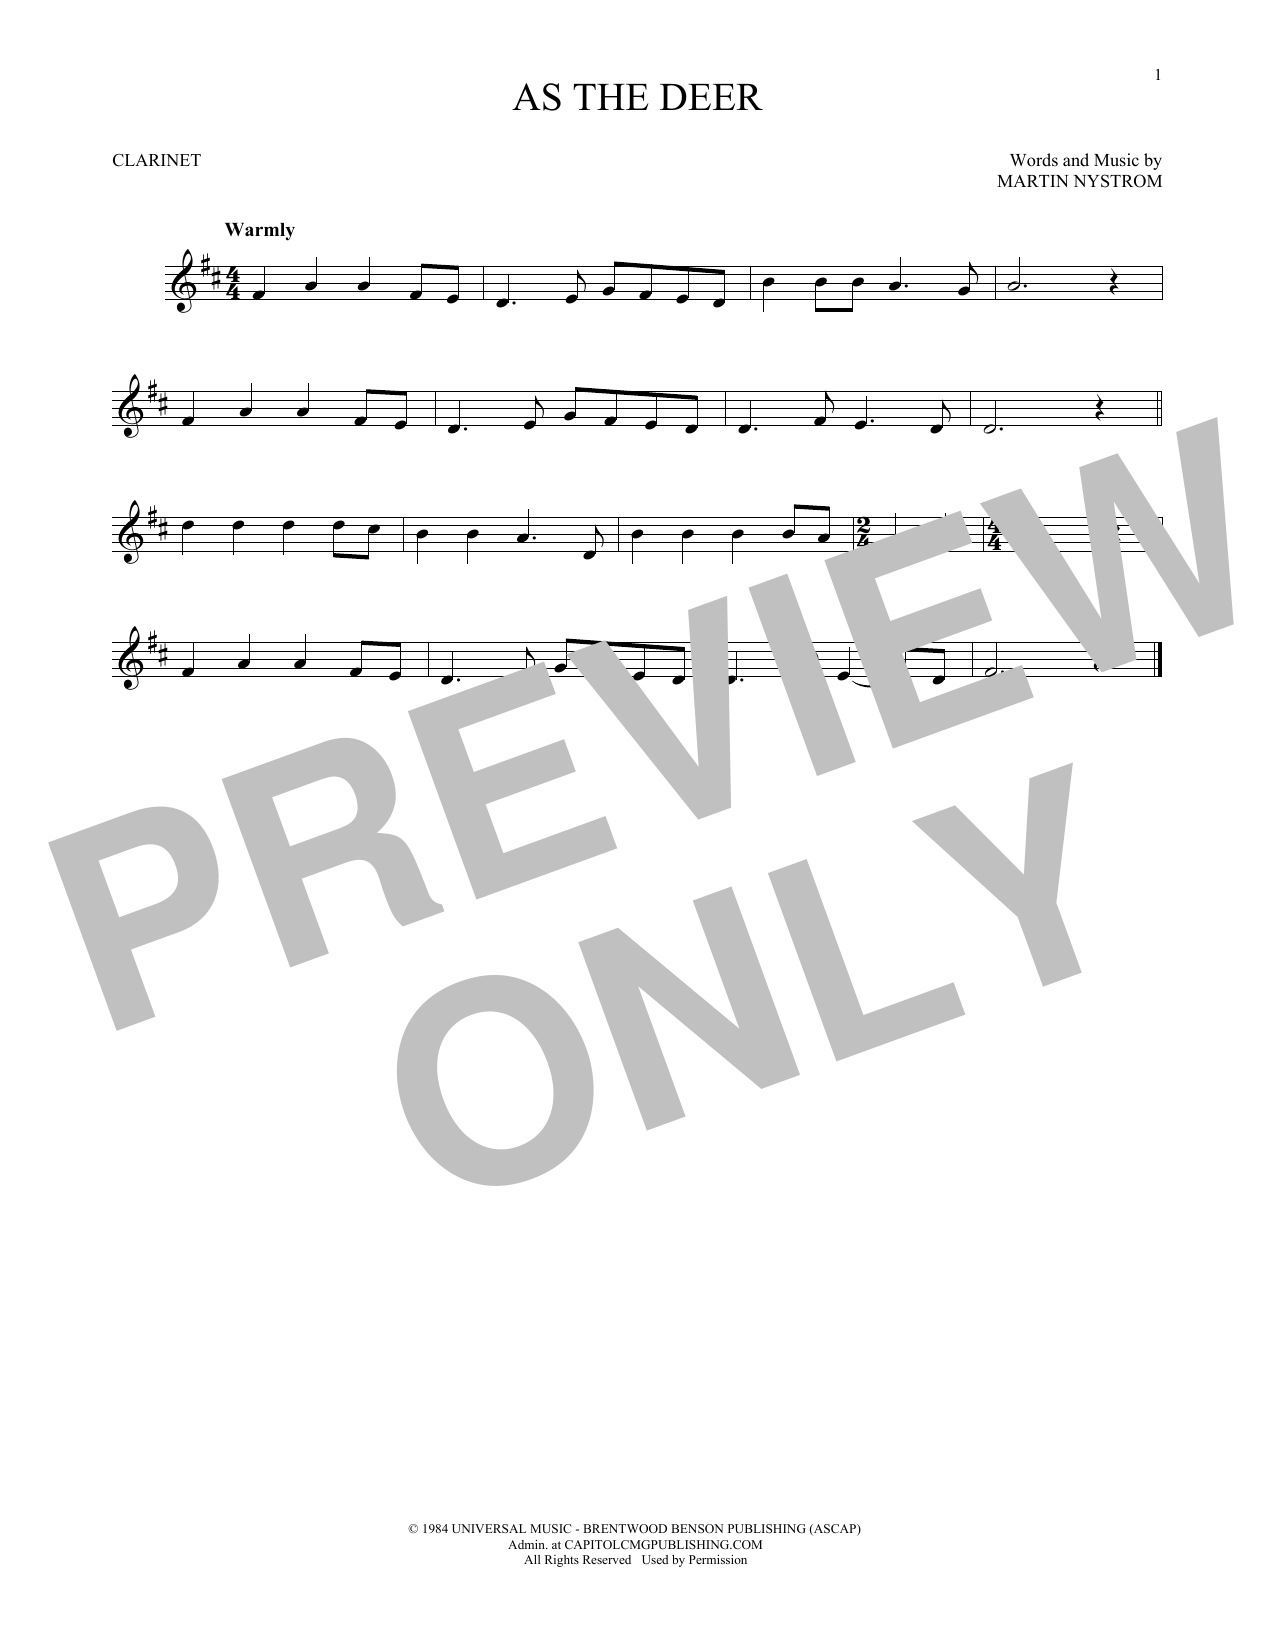 Martin Nystrom As The Deer sheet music notes printable PDF score